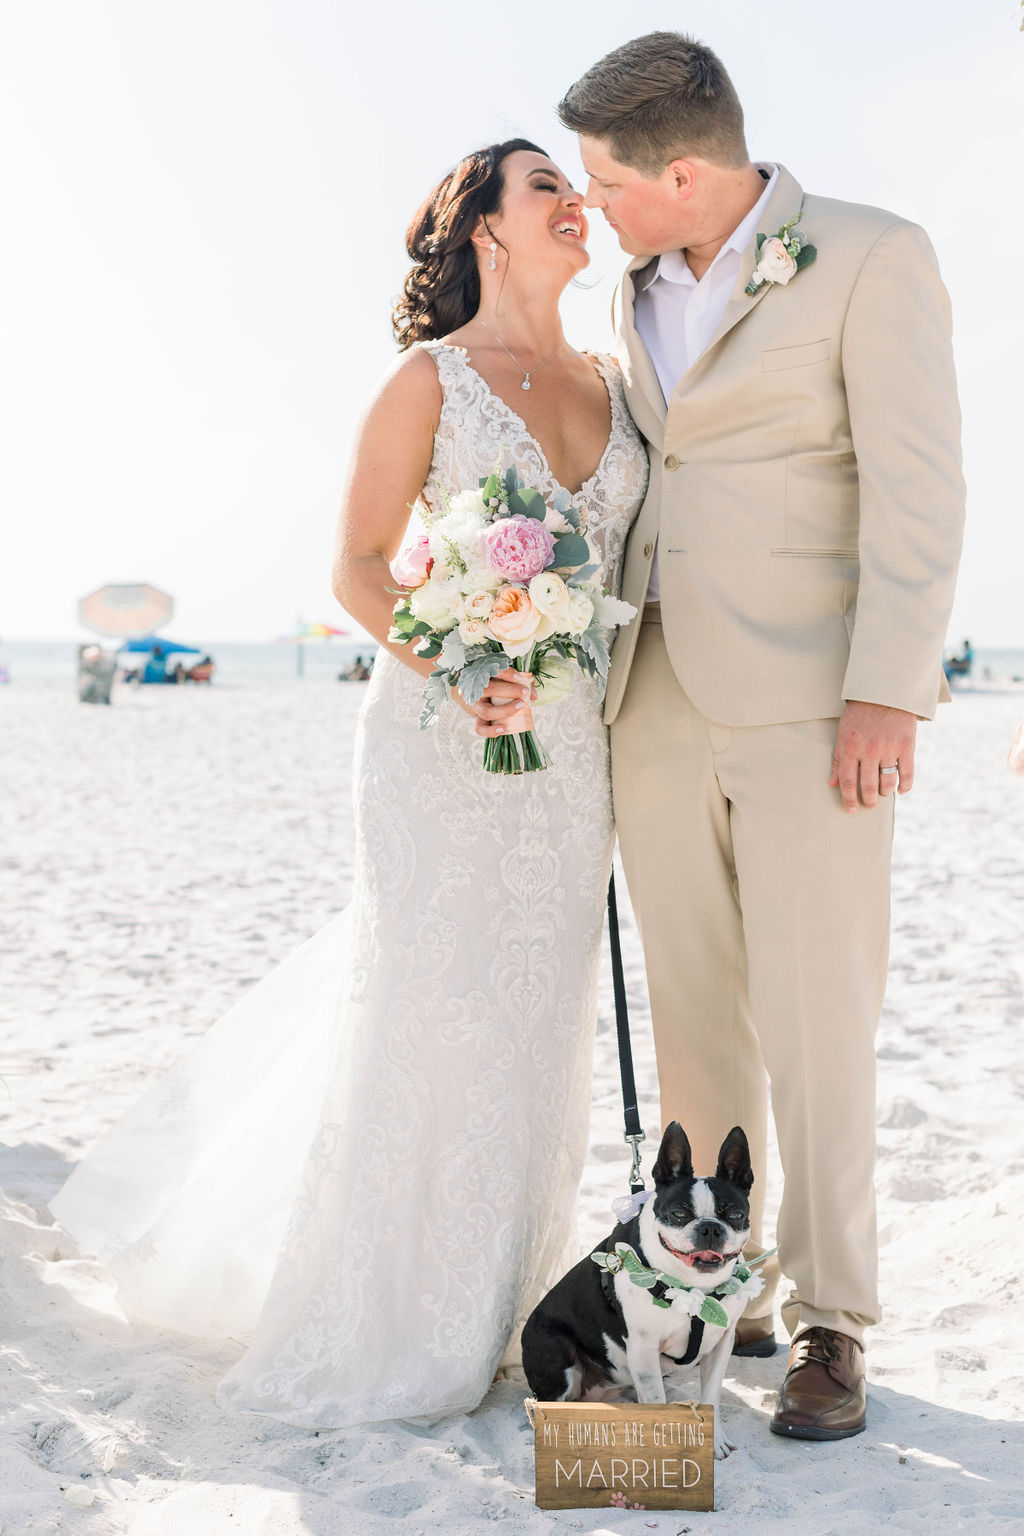 Florida Bride and Groom Wedding Portrait on Clearwater Beach with Dog, Bride in Fitted V Neckline Lace and Rhinestone Embellished Wedding Dress with Rustic Inspired Floral Bouquet, Groom in Tan Suit | Pet Planner FairyTail Pet Care | Planner Gulf Beach Weddings